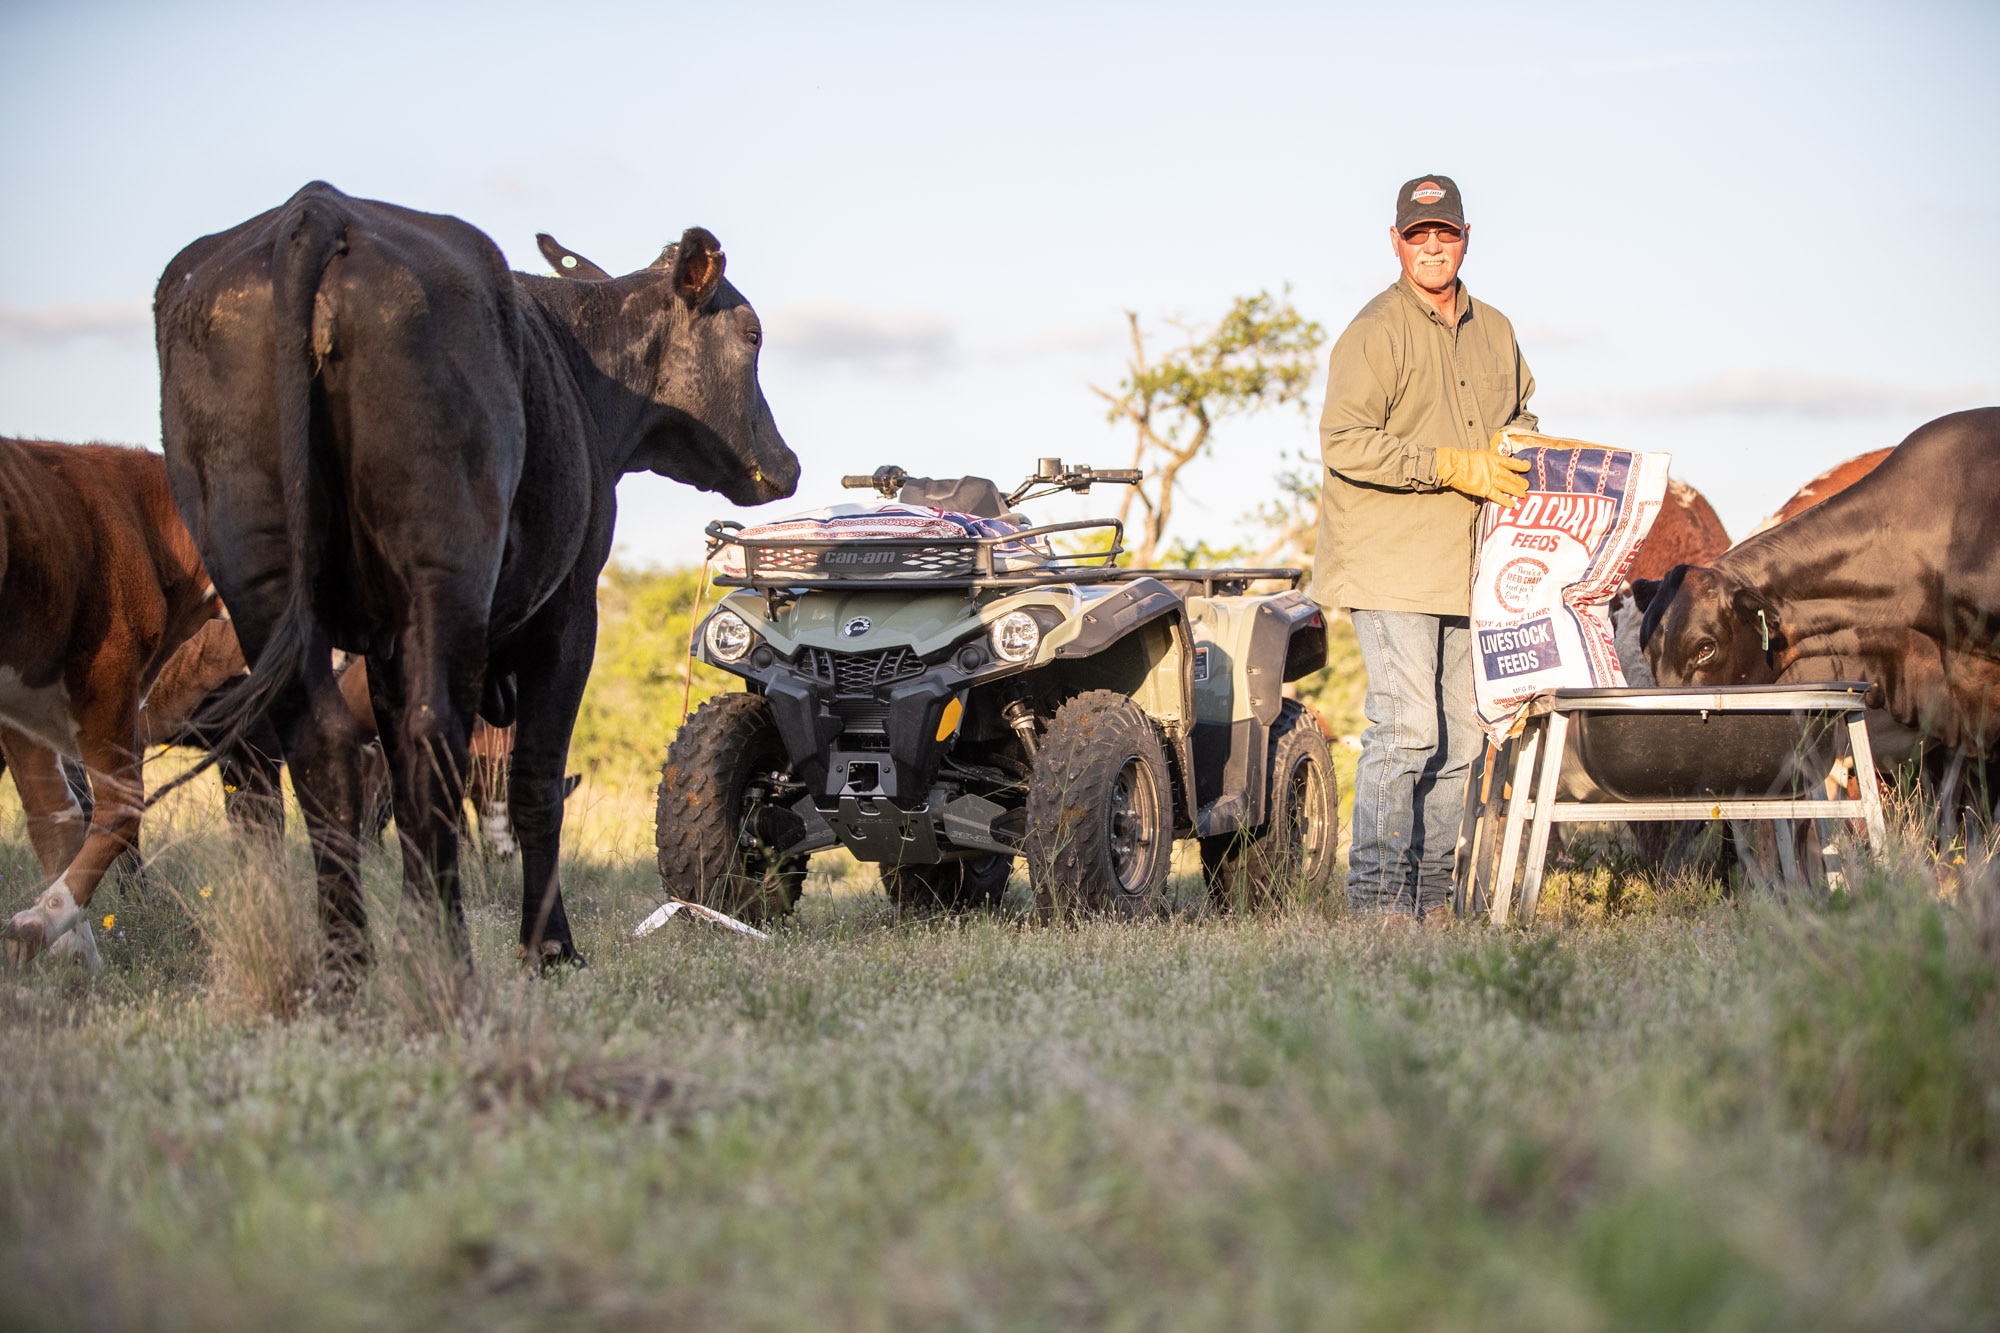 A Can-Am Outlander DPS ATV in a ranch surrounded by animals and a man